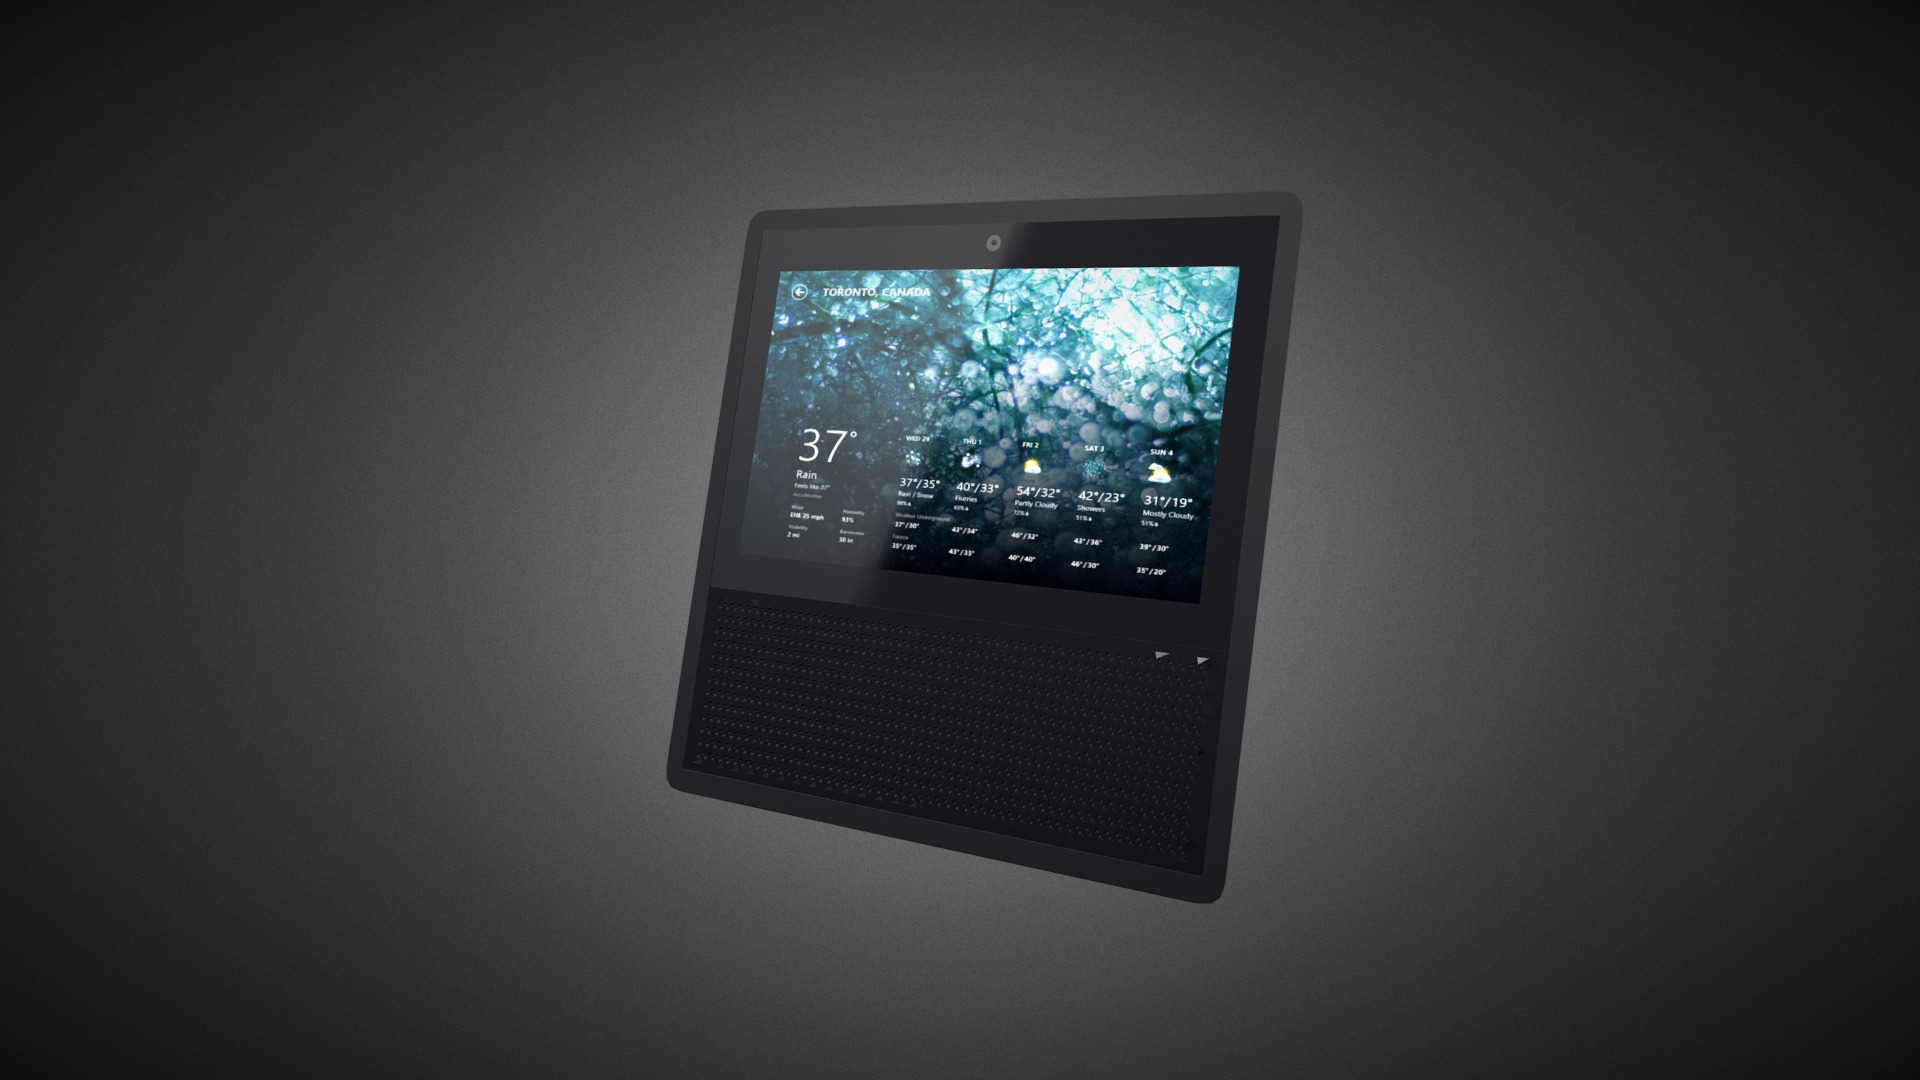 3D model Amazon Echo Show for Element 3D - This is a 3D model of the Amazon Echo Show for Element 3D. The 3D model is about a tablet on a table.